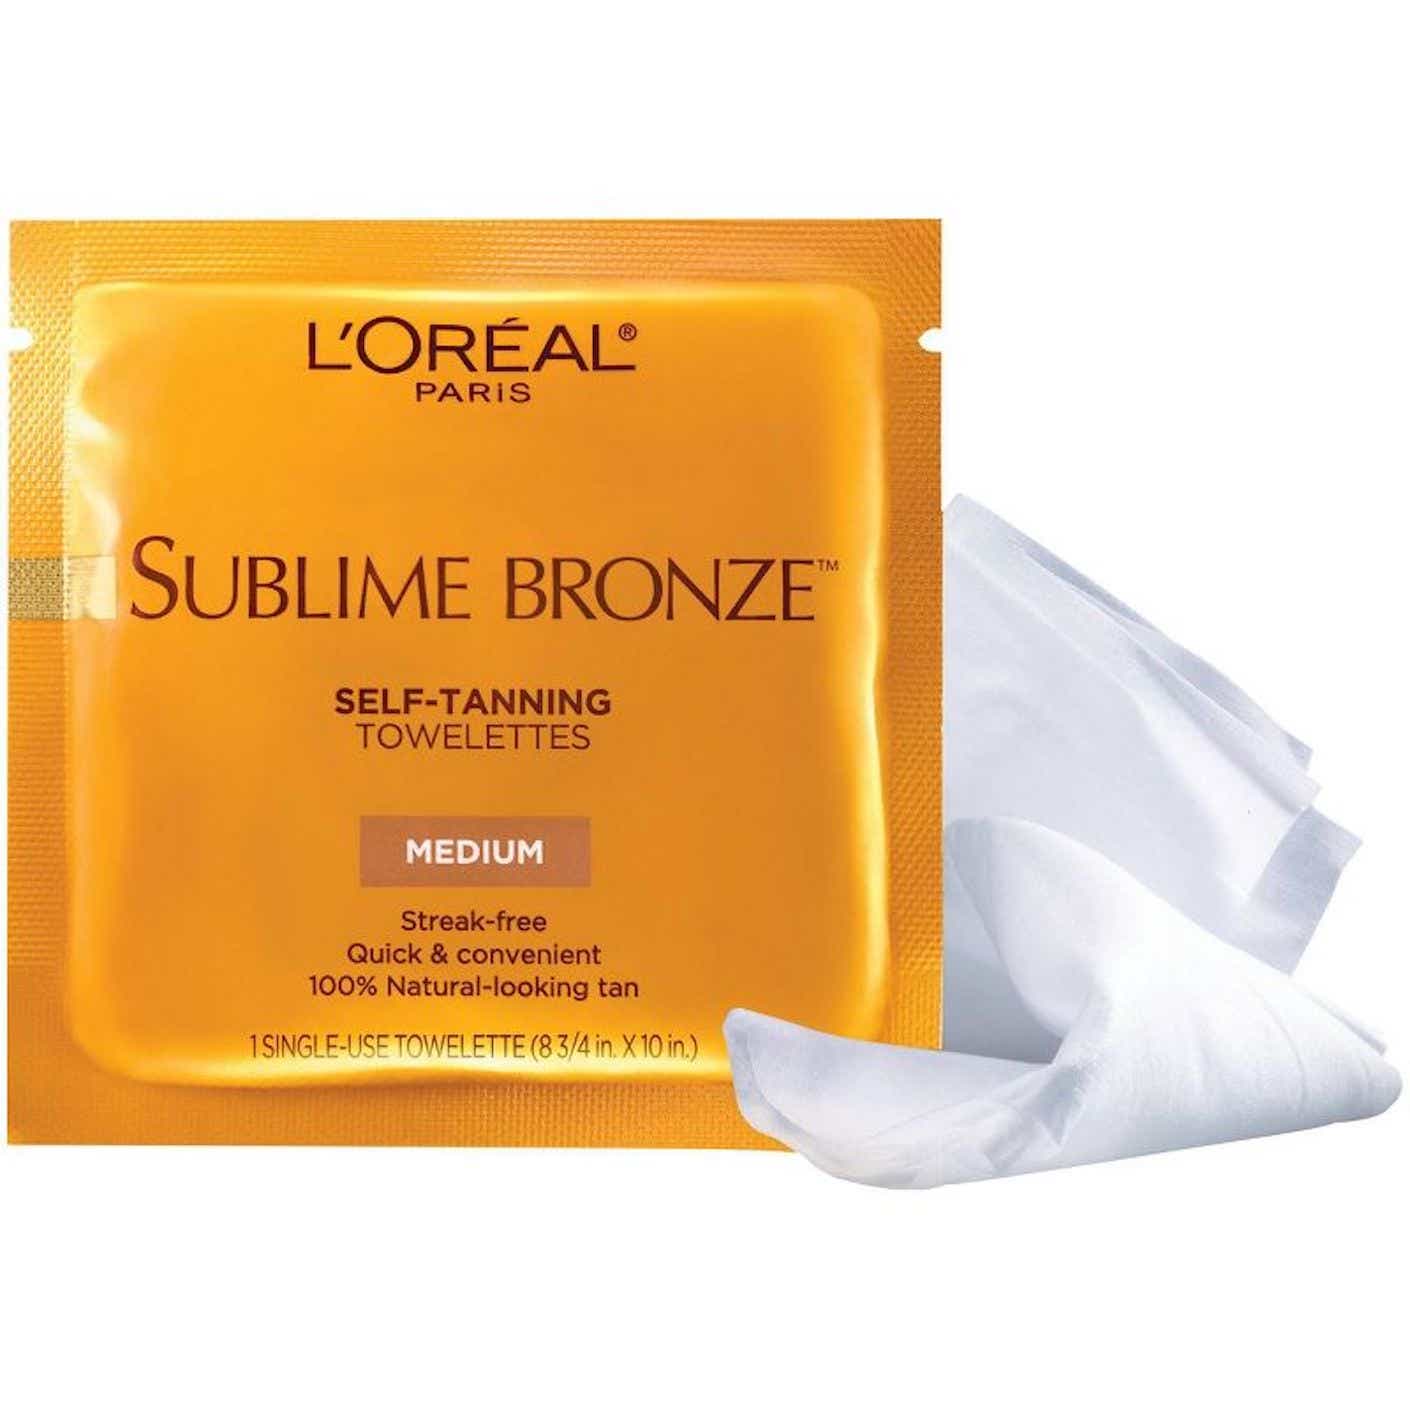 A flat, plastic, metallic orange packet holds a self tanning towelette.